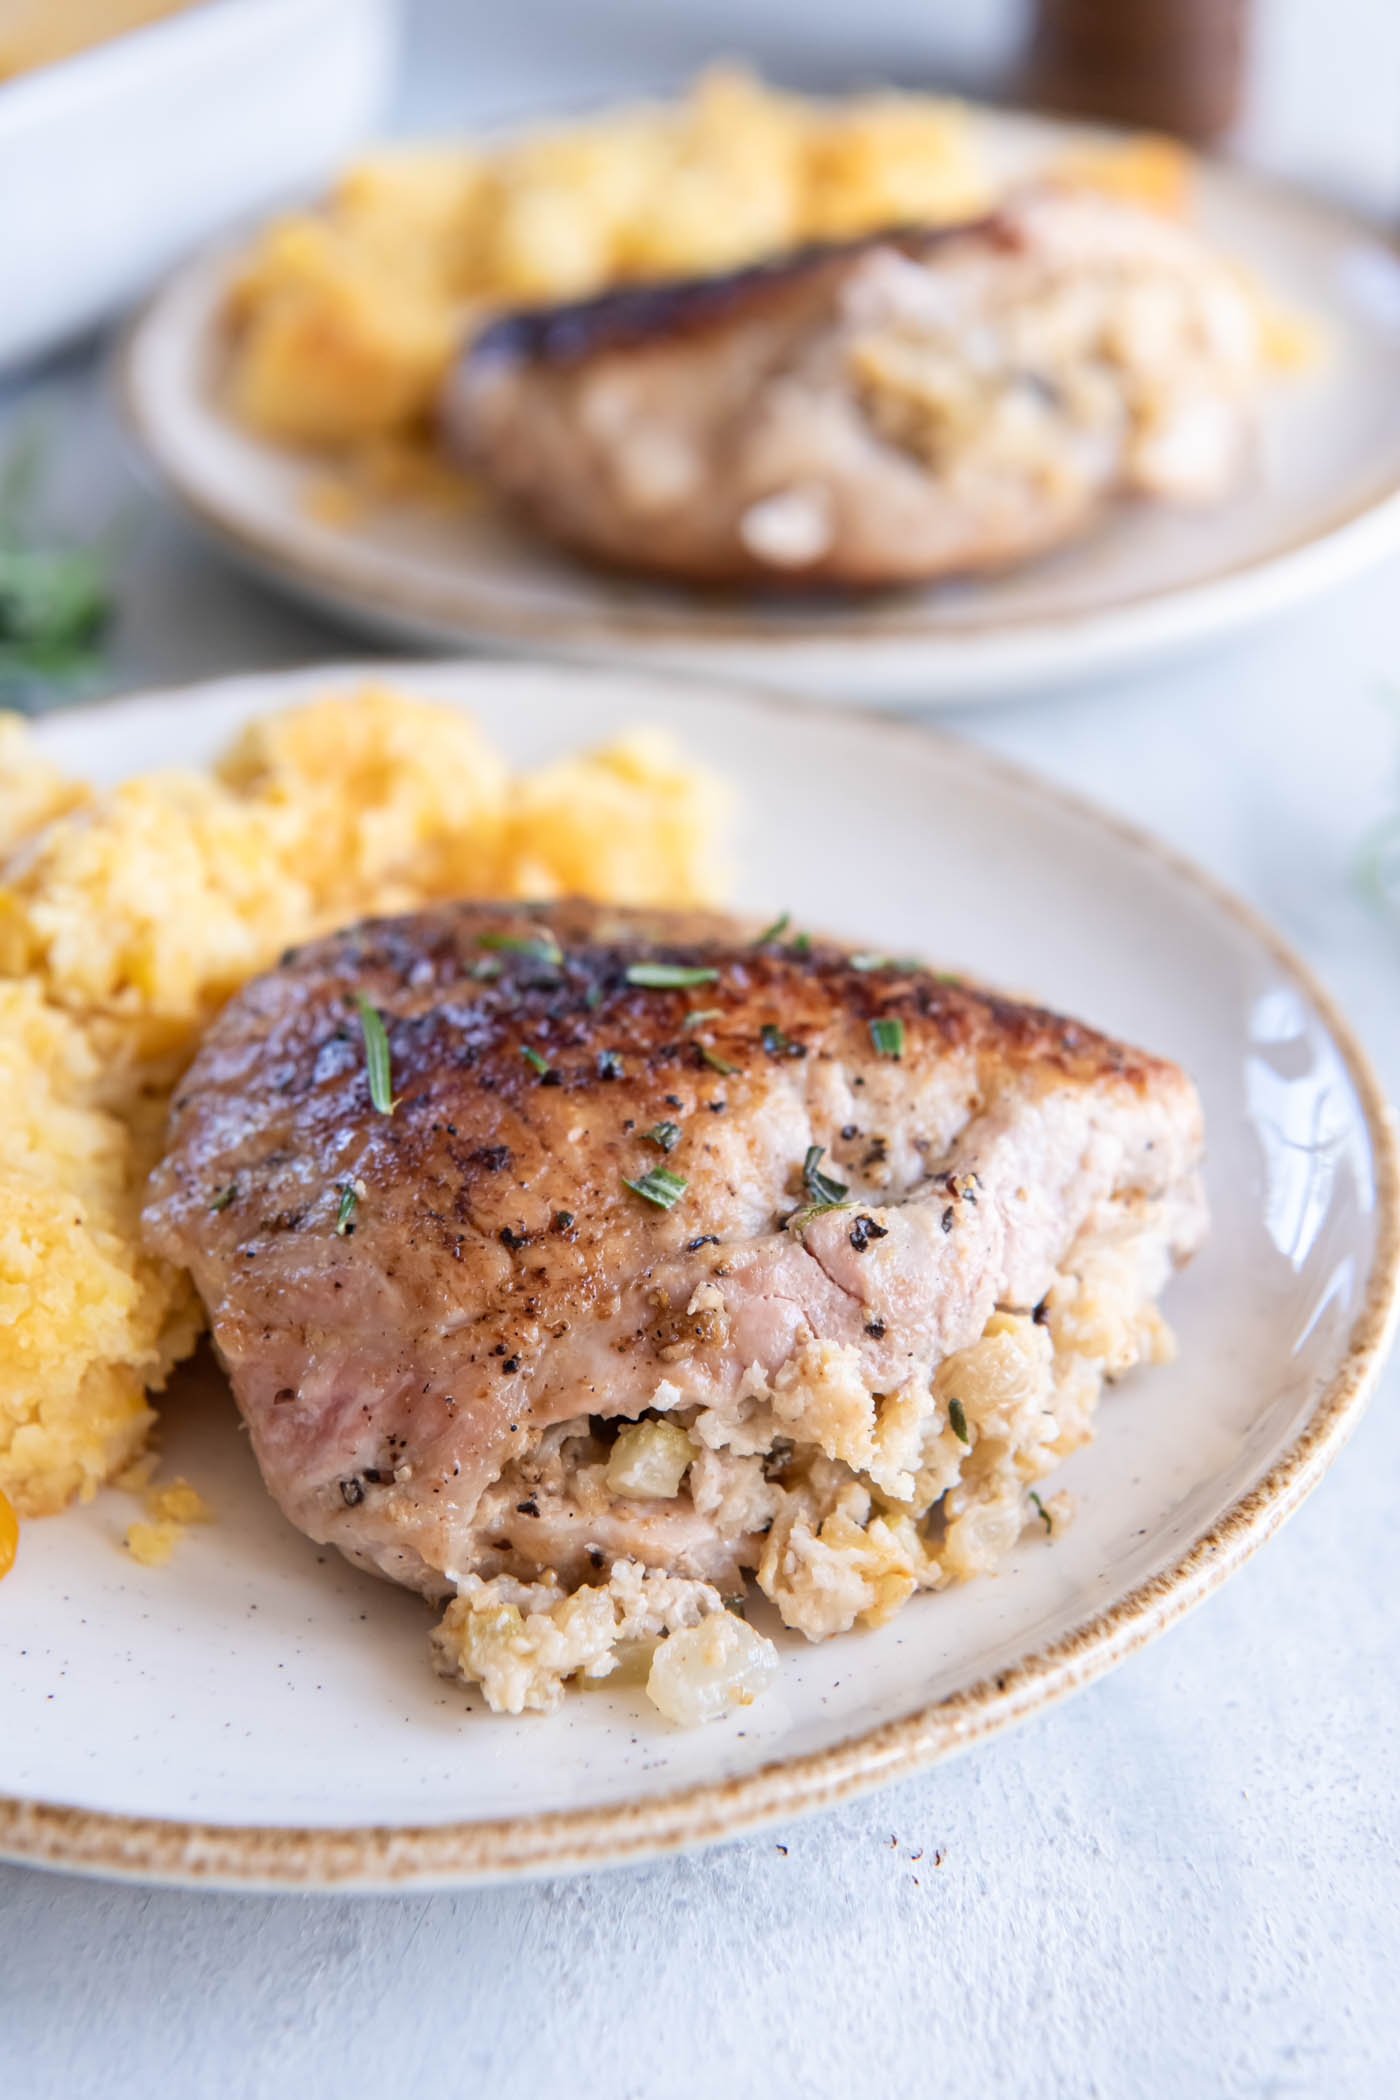 Pork chop stuffed with apple celery stuffing served on a plate with corn casserole.